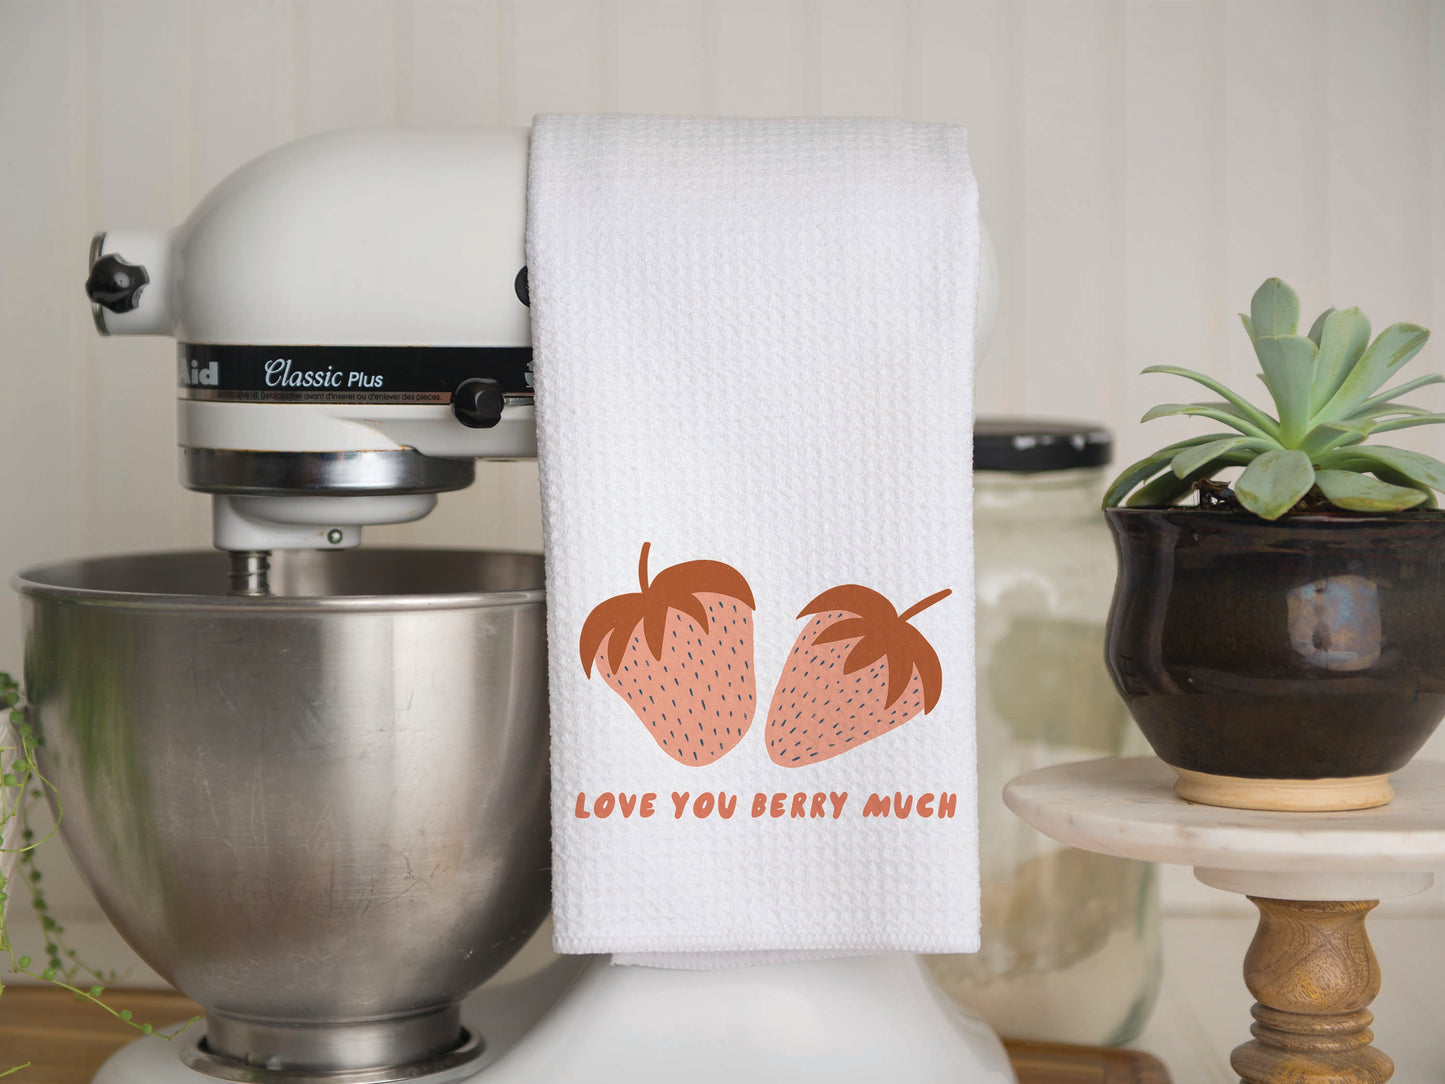 Love You Berry Much Waffle Weave Kitchen Towel